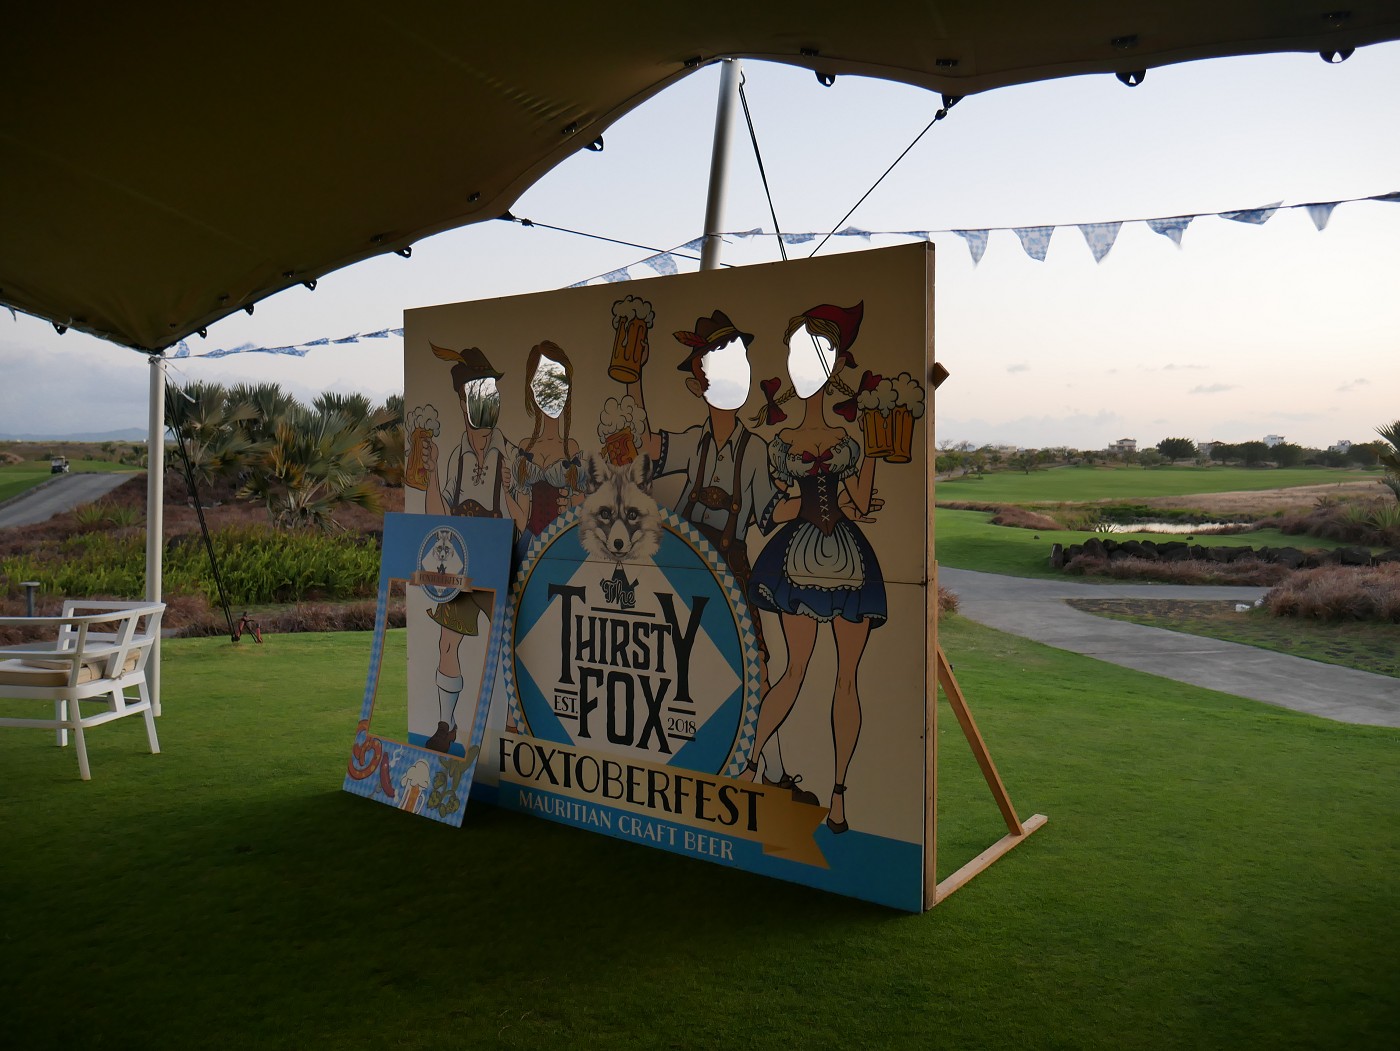 Foxtoberfest Mauritius le golf craft beer event the thirsty fox